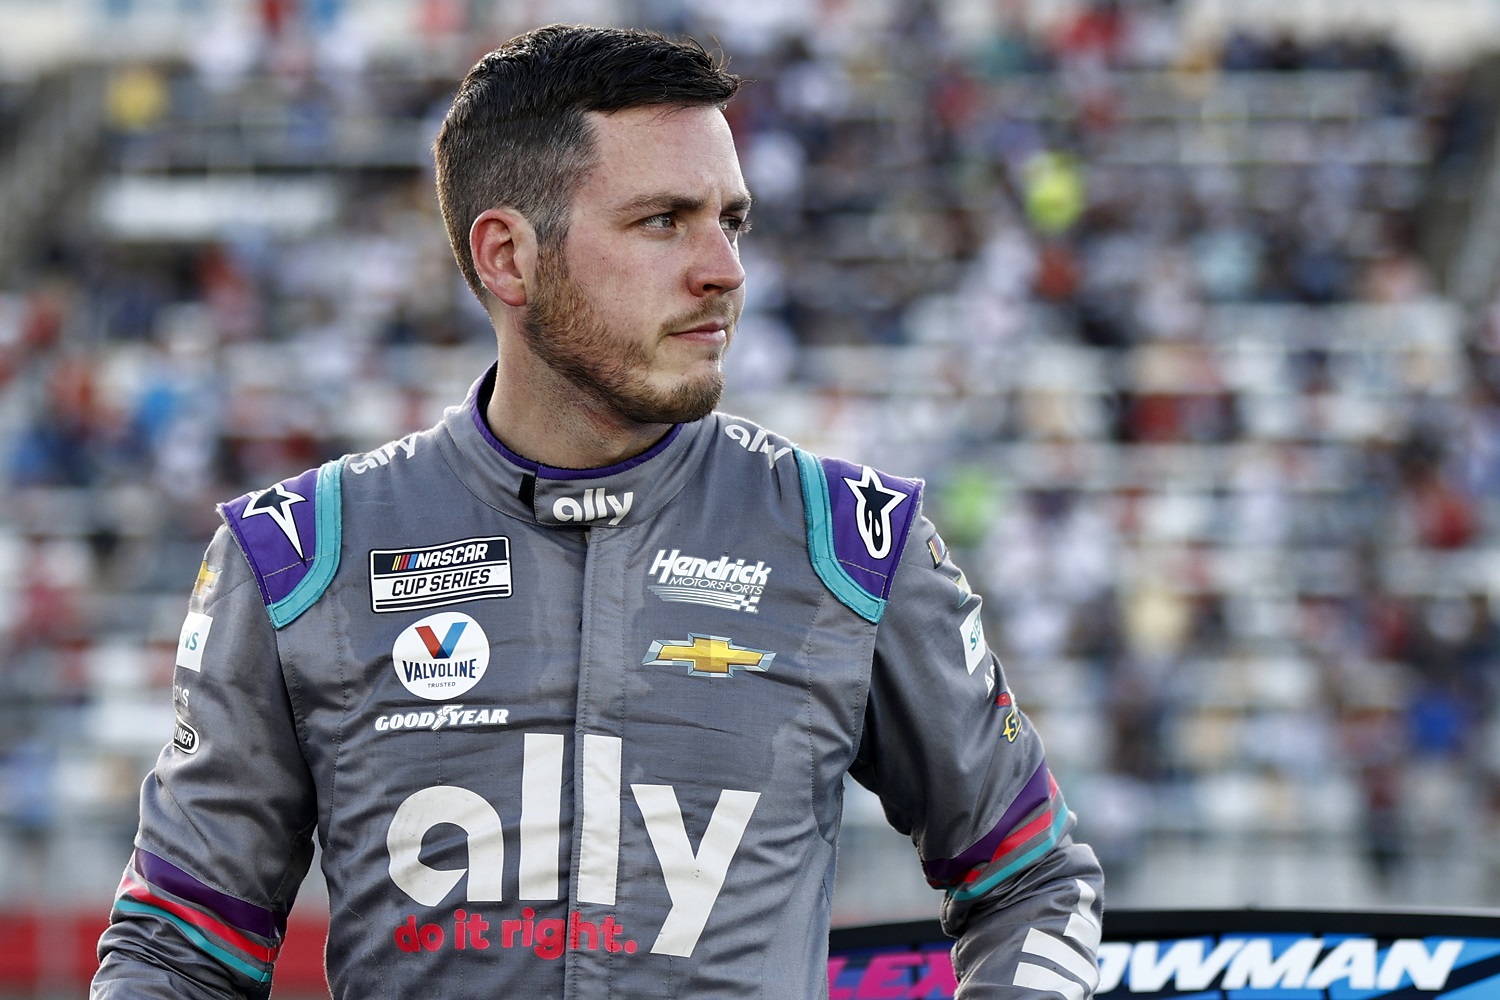 Alex Bowman, driver of the No. 48 Chevrolet, exits his car after the NASCAR Cup Series Bank of America Roval 400 at Charlotte Motor Speedway on Oct. 10, 2021.